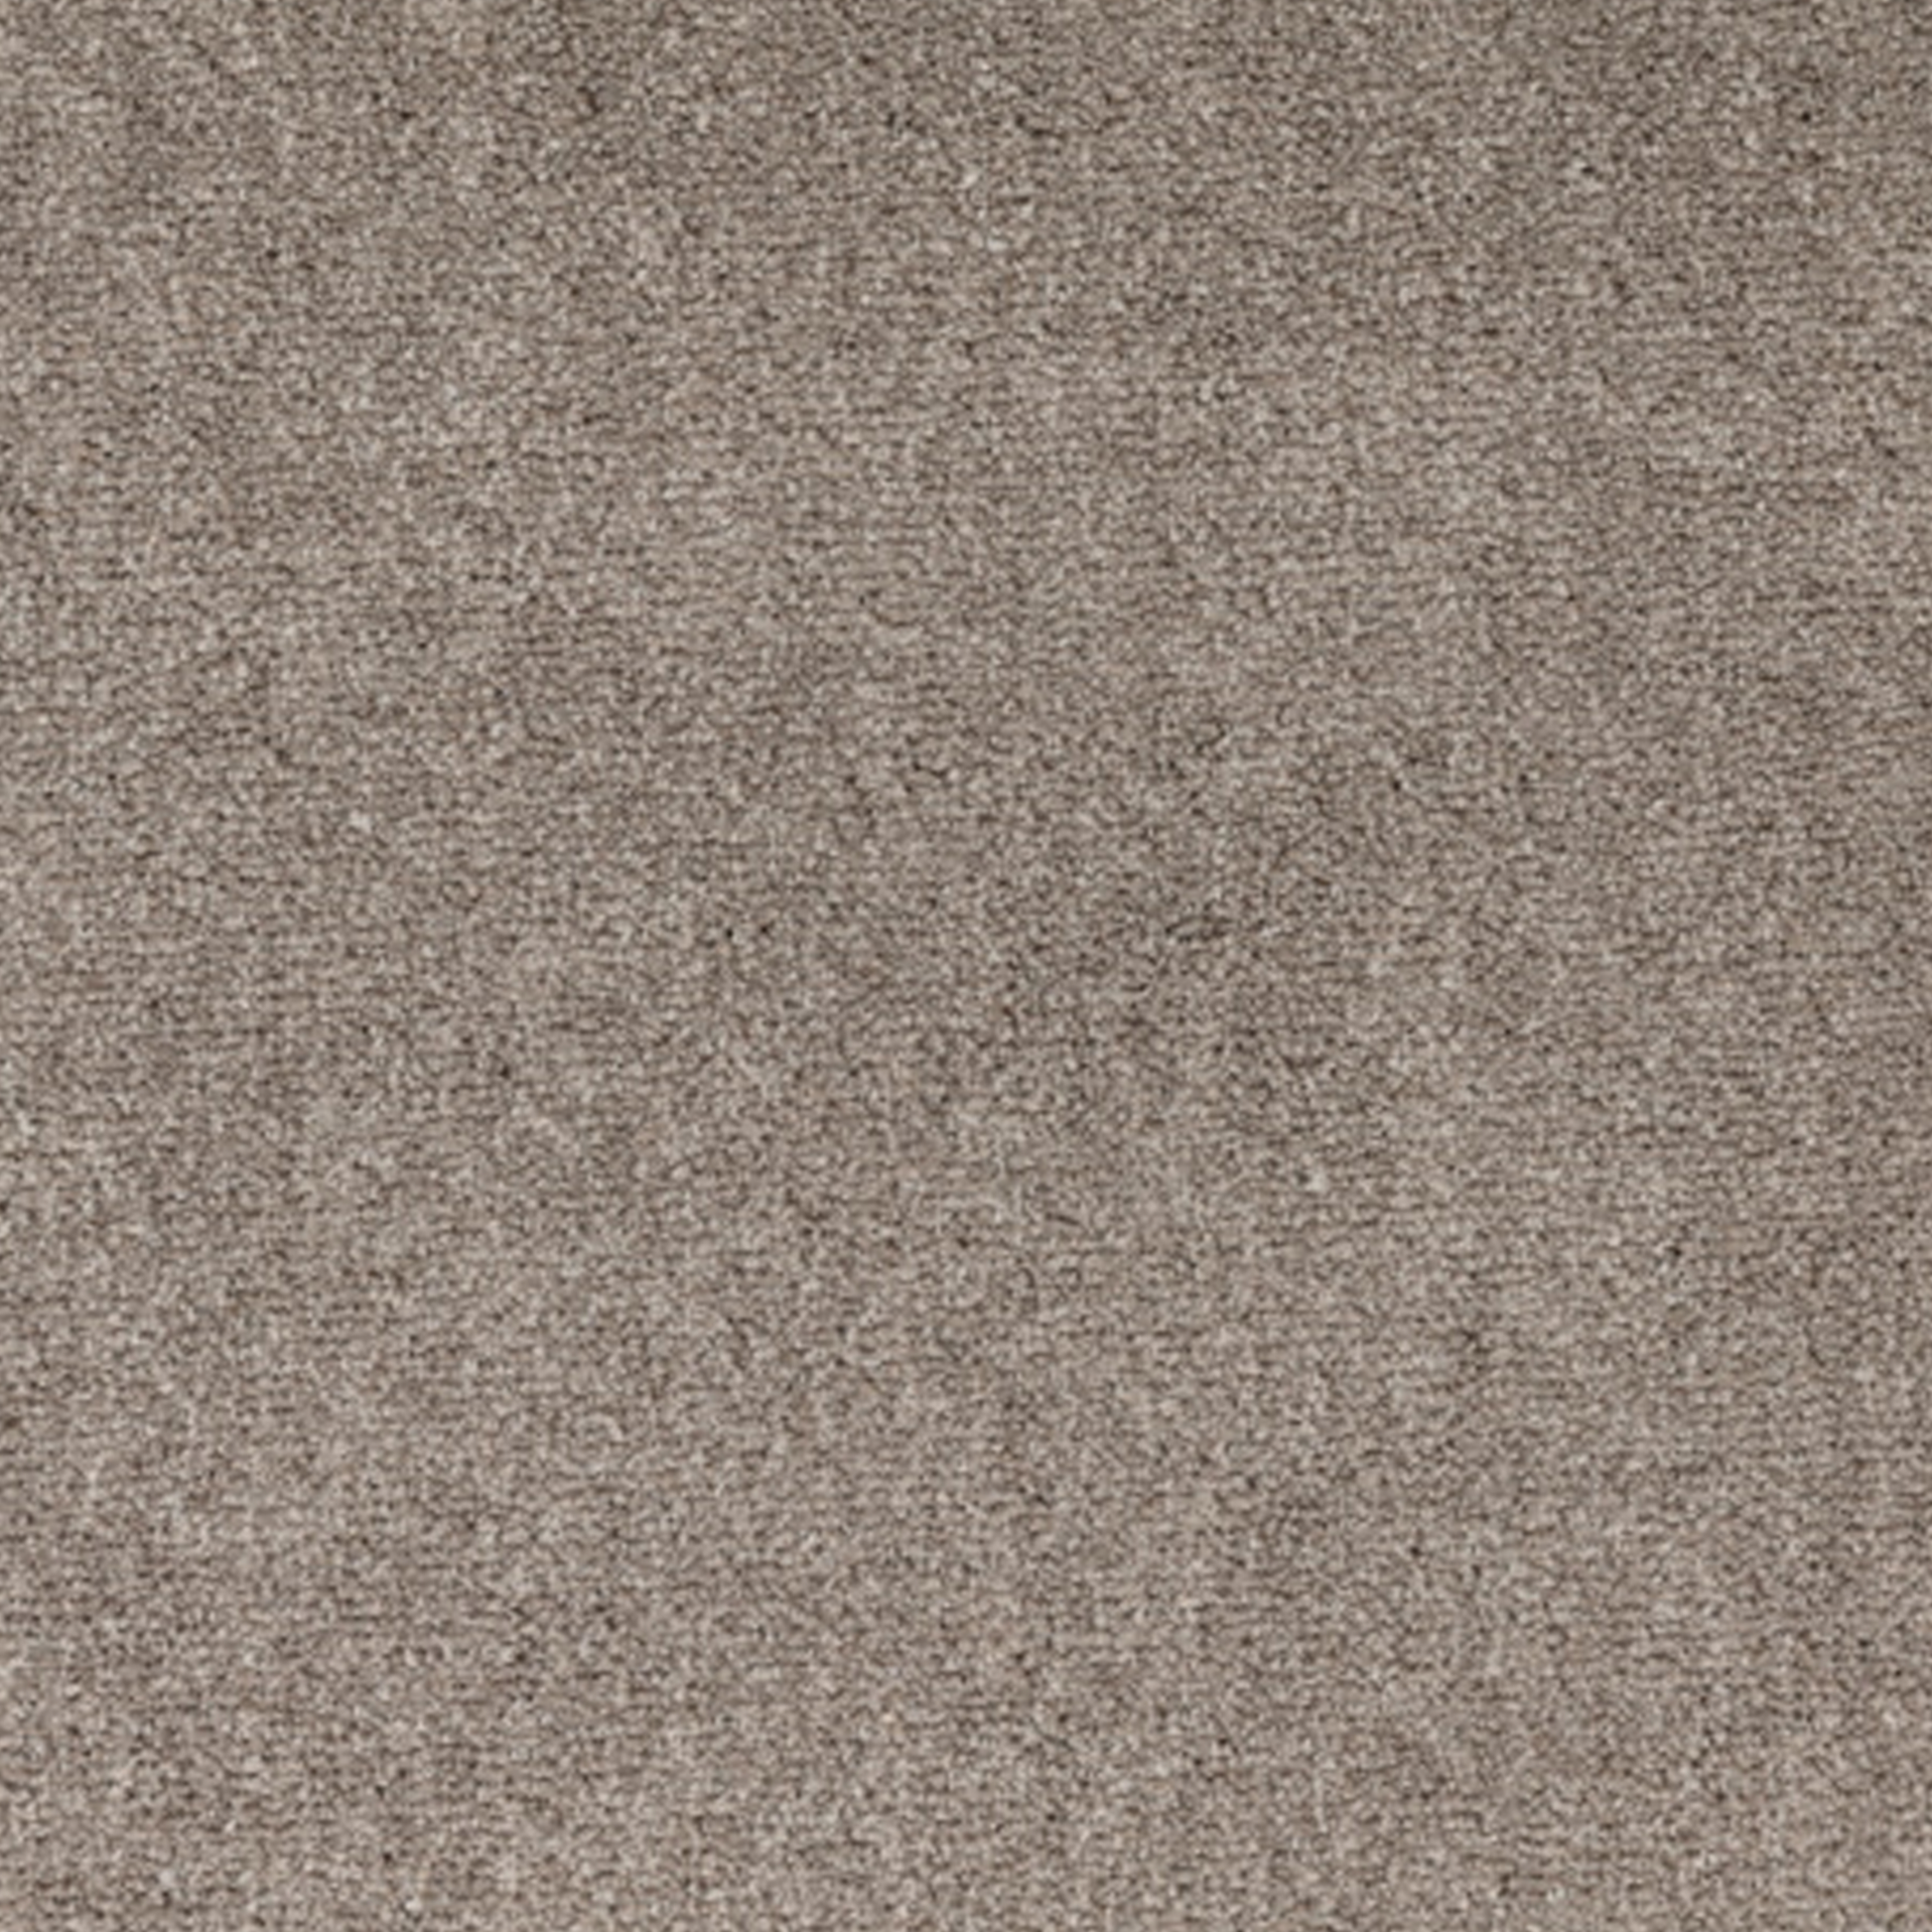 Let's Dance II Polyester Carpet Collection Polyester Carpet by KLD Home